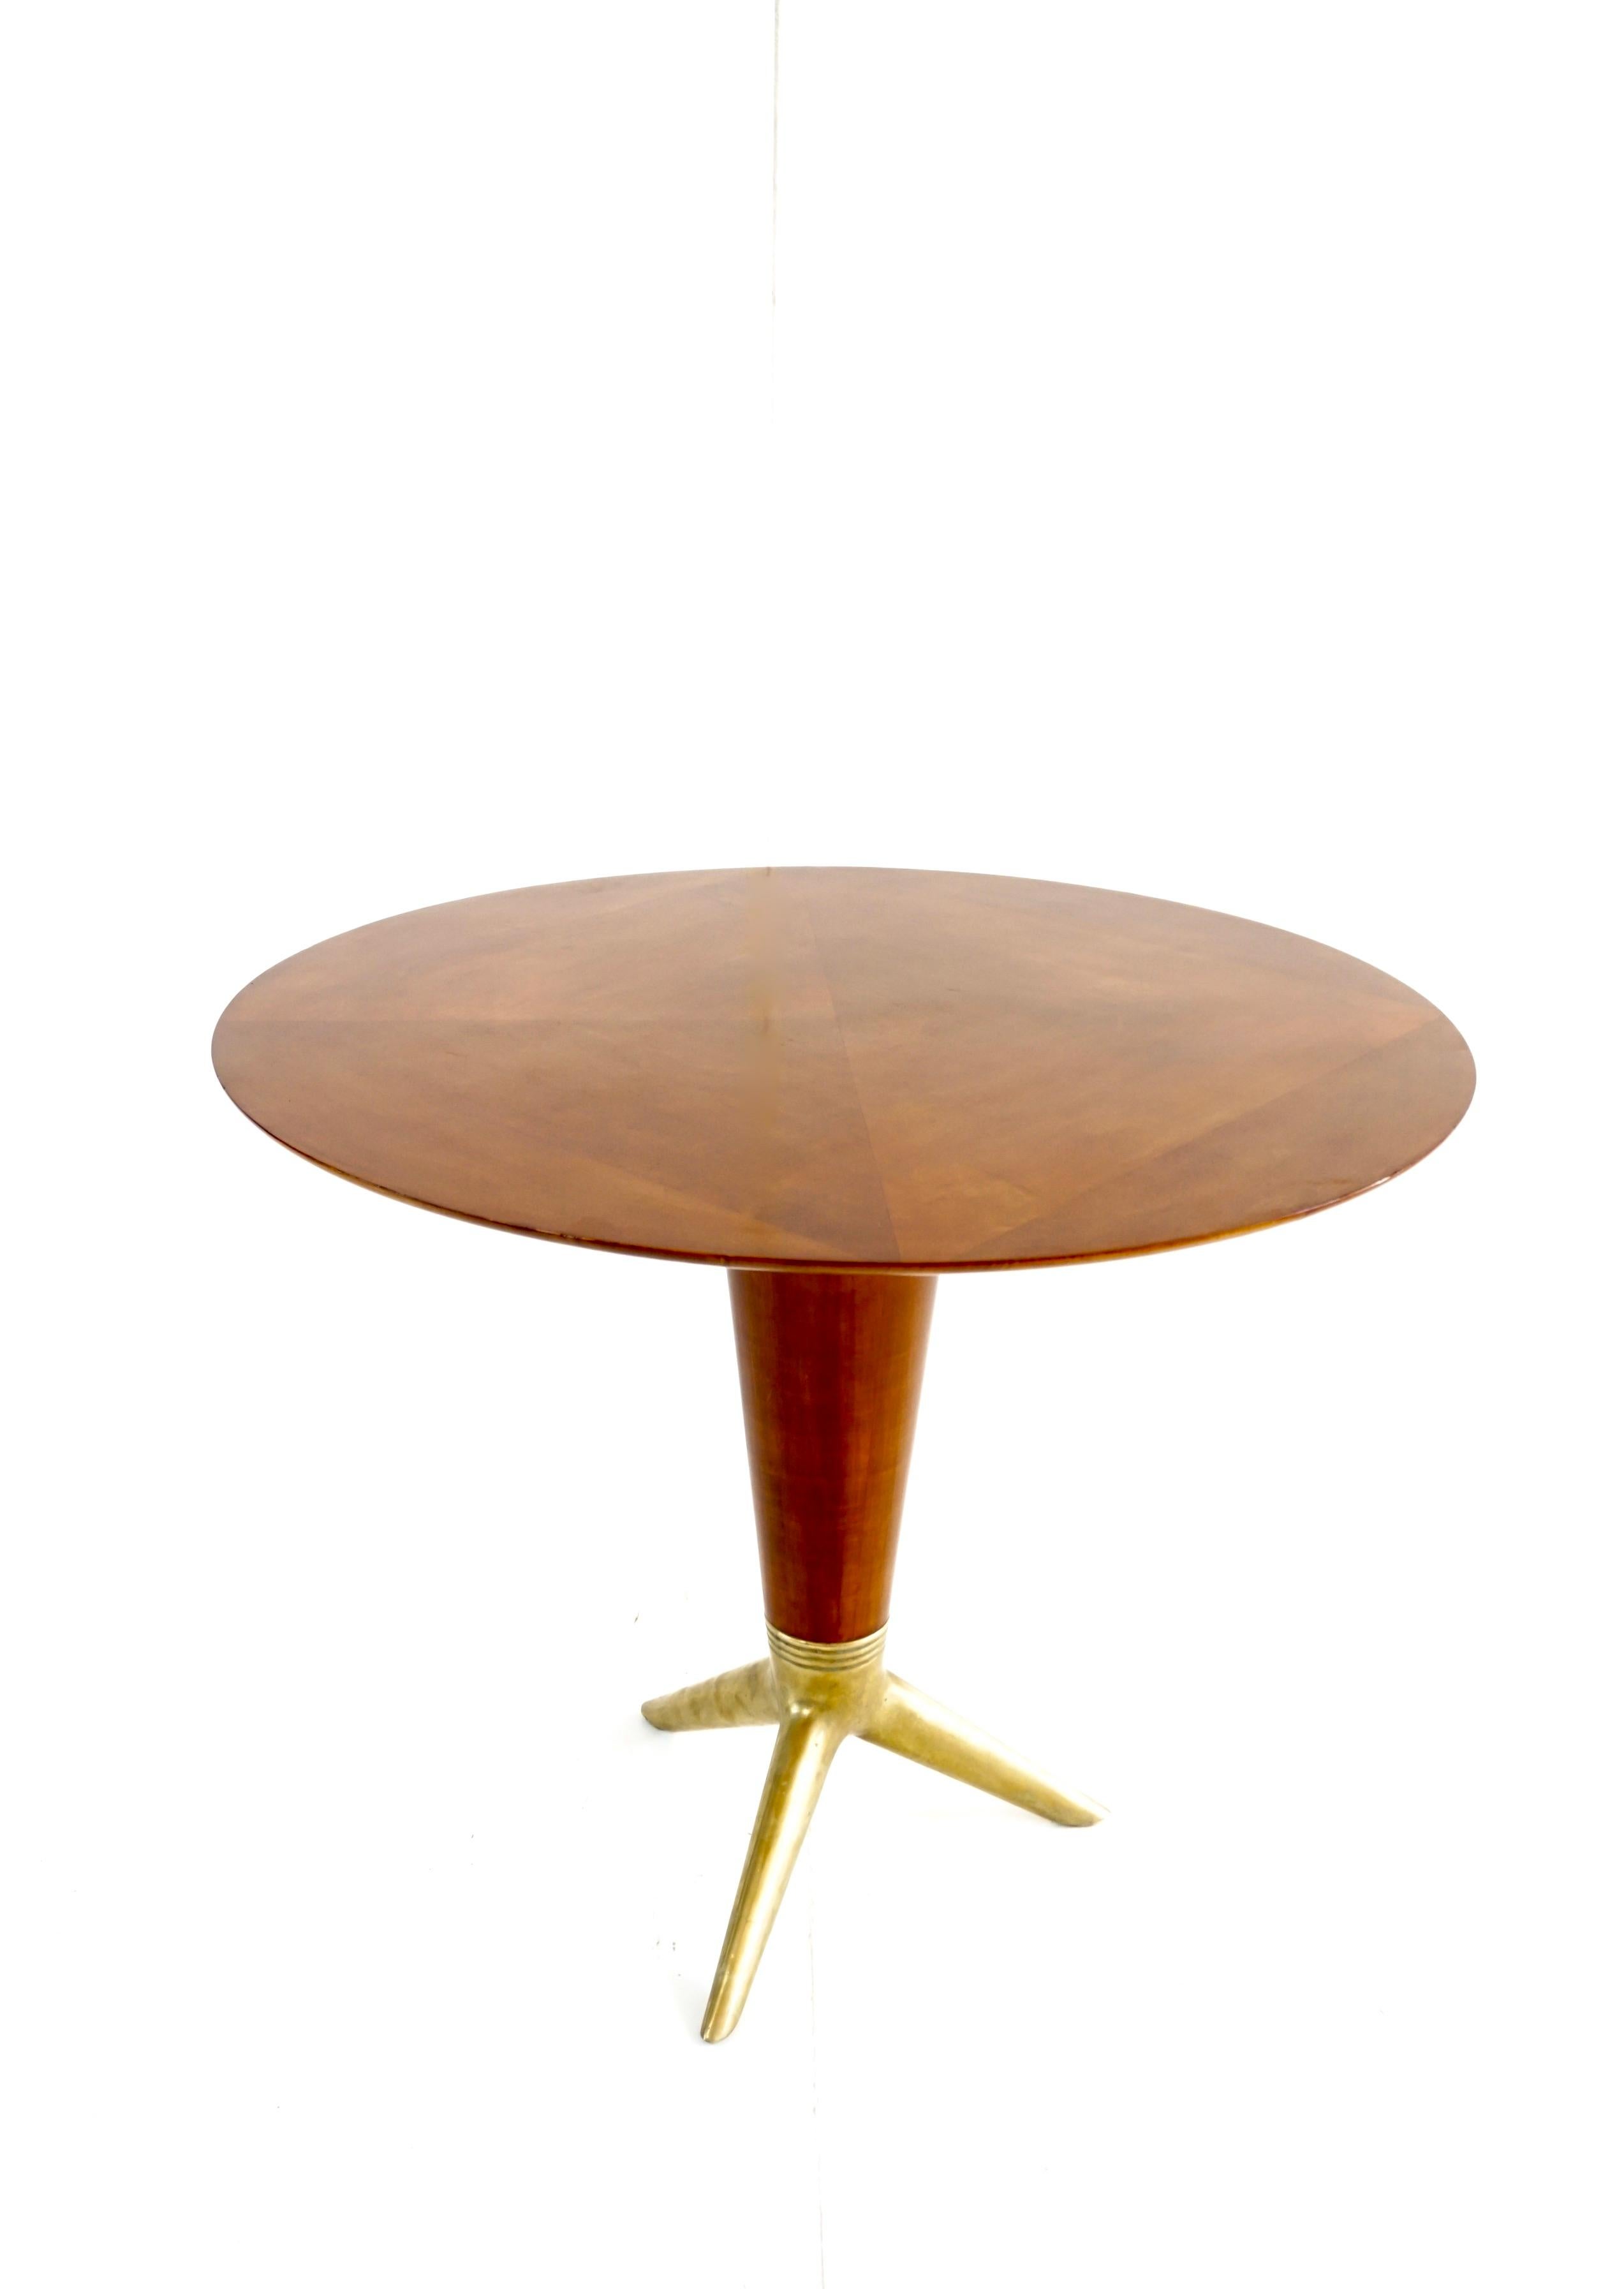 Rare Maple and Brass Round Center Table by I.S.A. Bergamo 1950 In Good Condition For Sale In Rome, IT